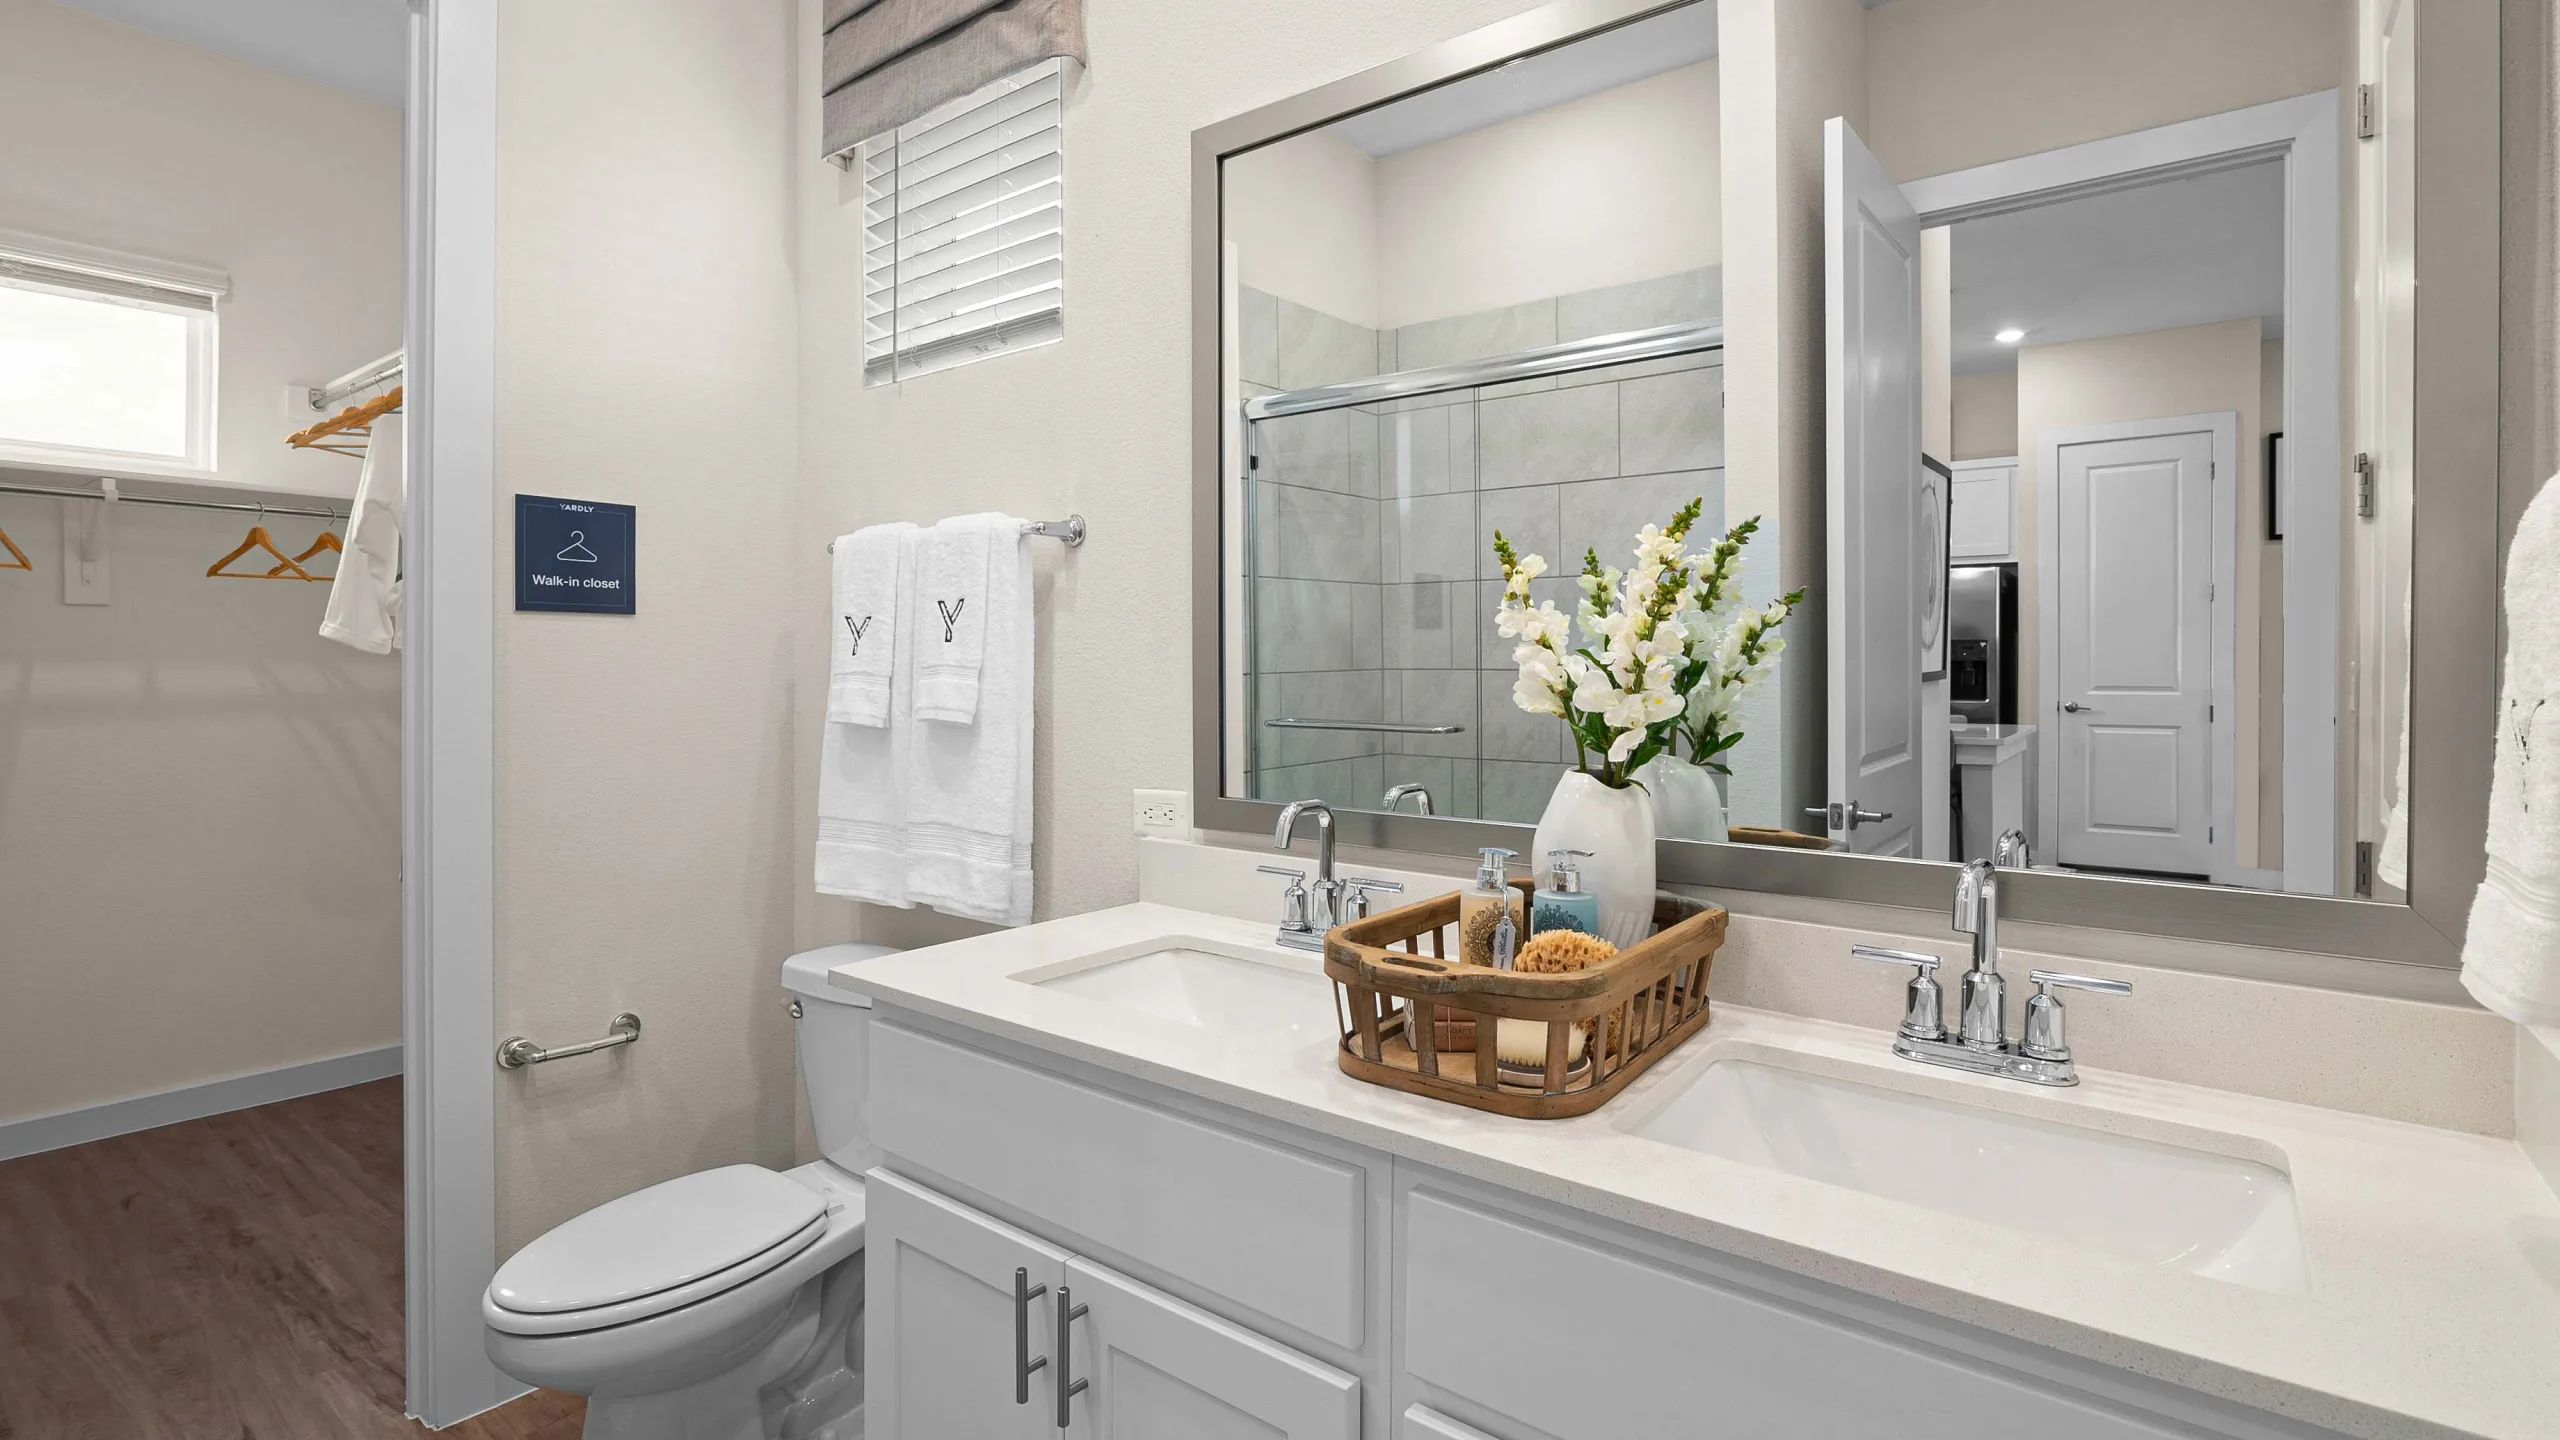 Primary bathroom with a walk-in closet in a 1-bedroom pet friendly home for rent with private backyard and doggy door in Cypress, Tx.